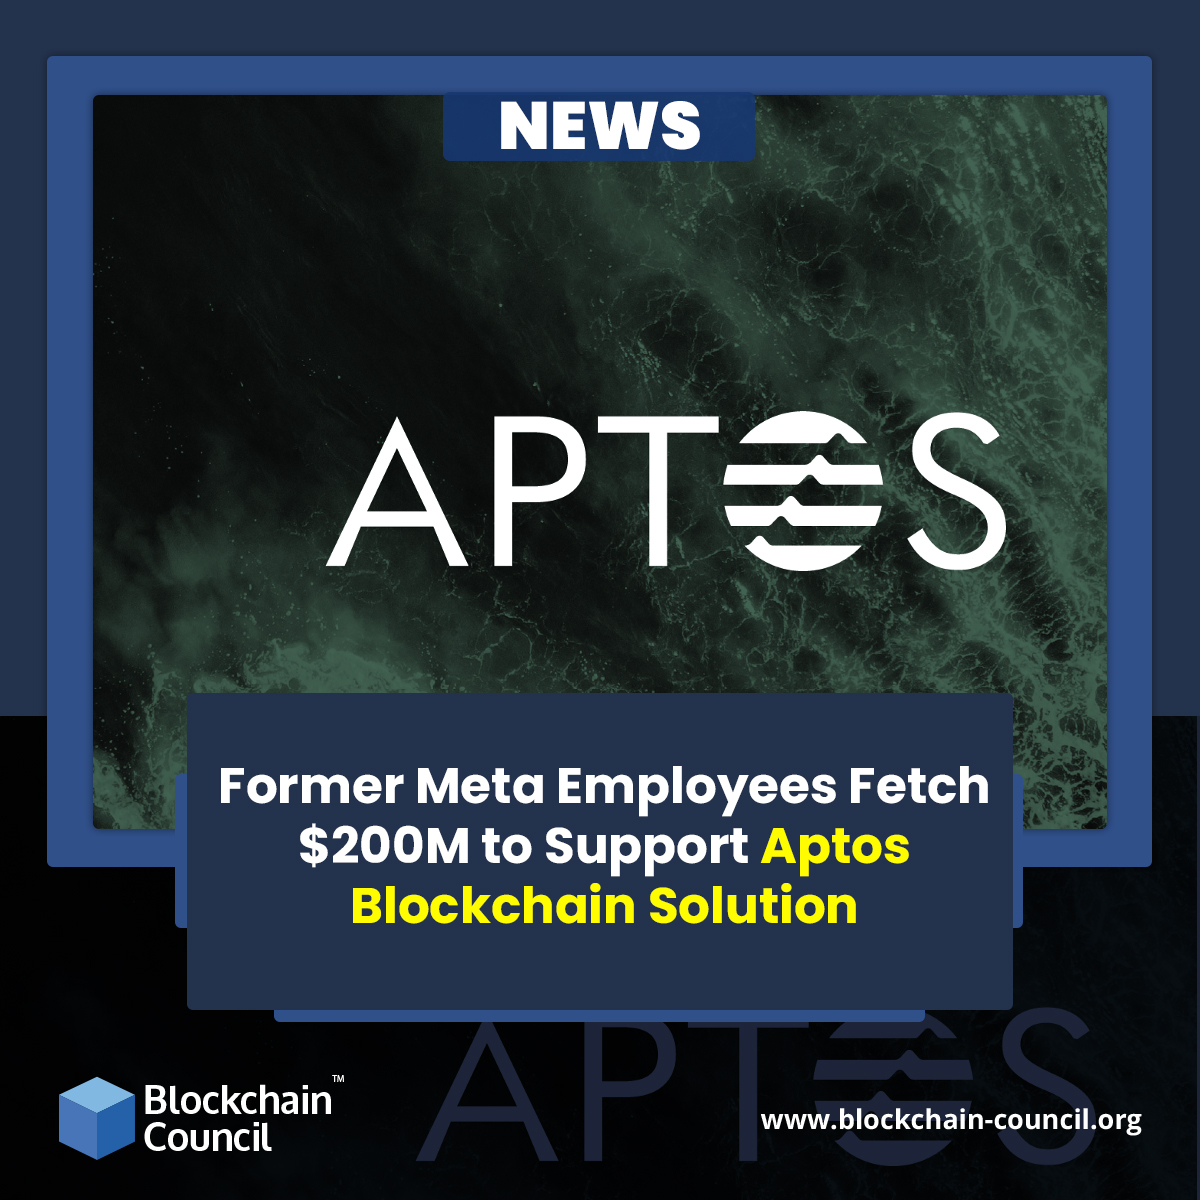 Former Meta Employees Fetch $200M to Support Aptos Blockchain Solution